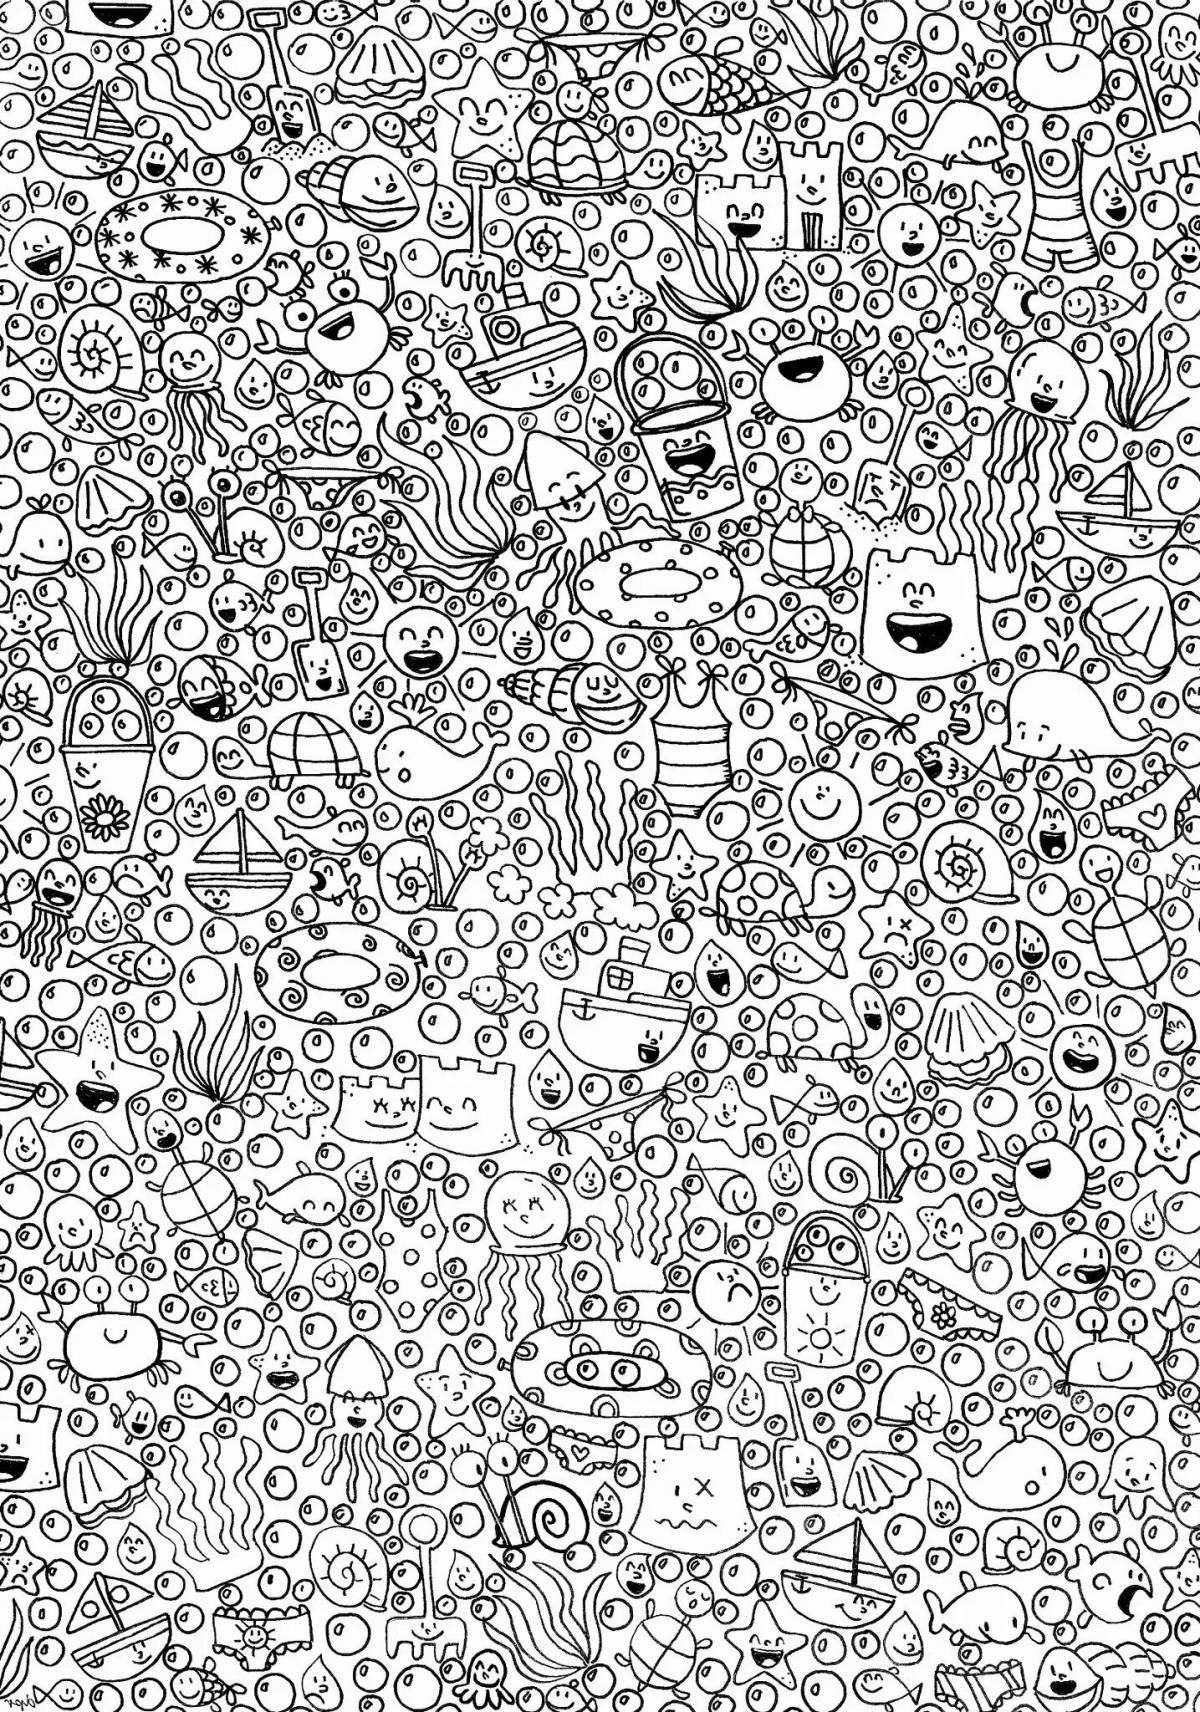 Stimulating coloring book if you are bored